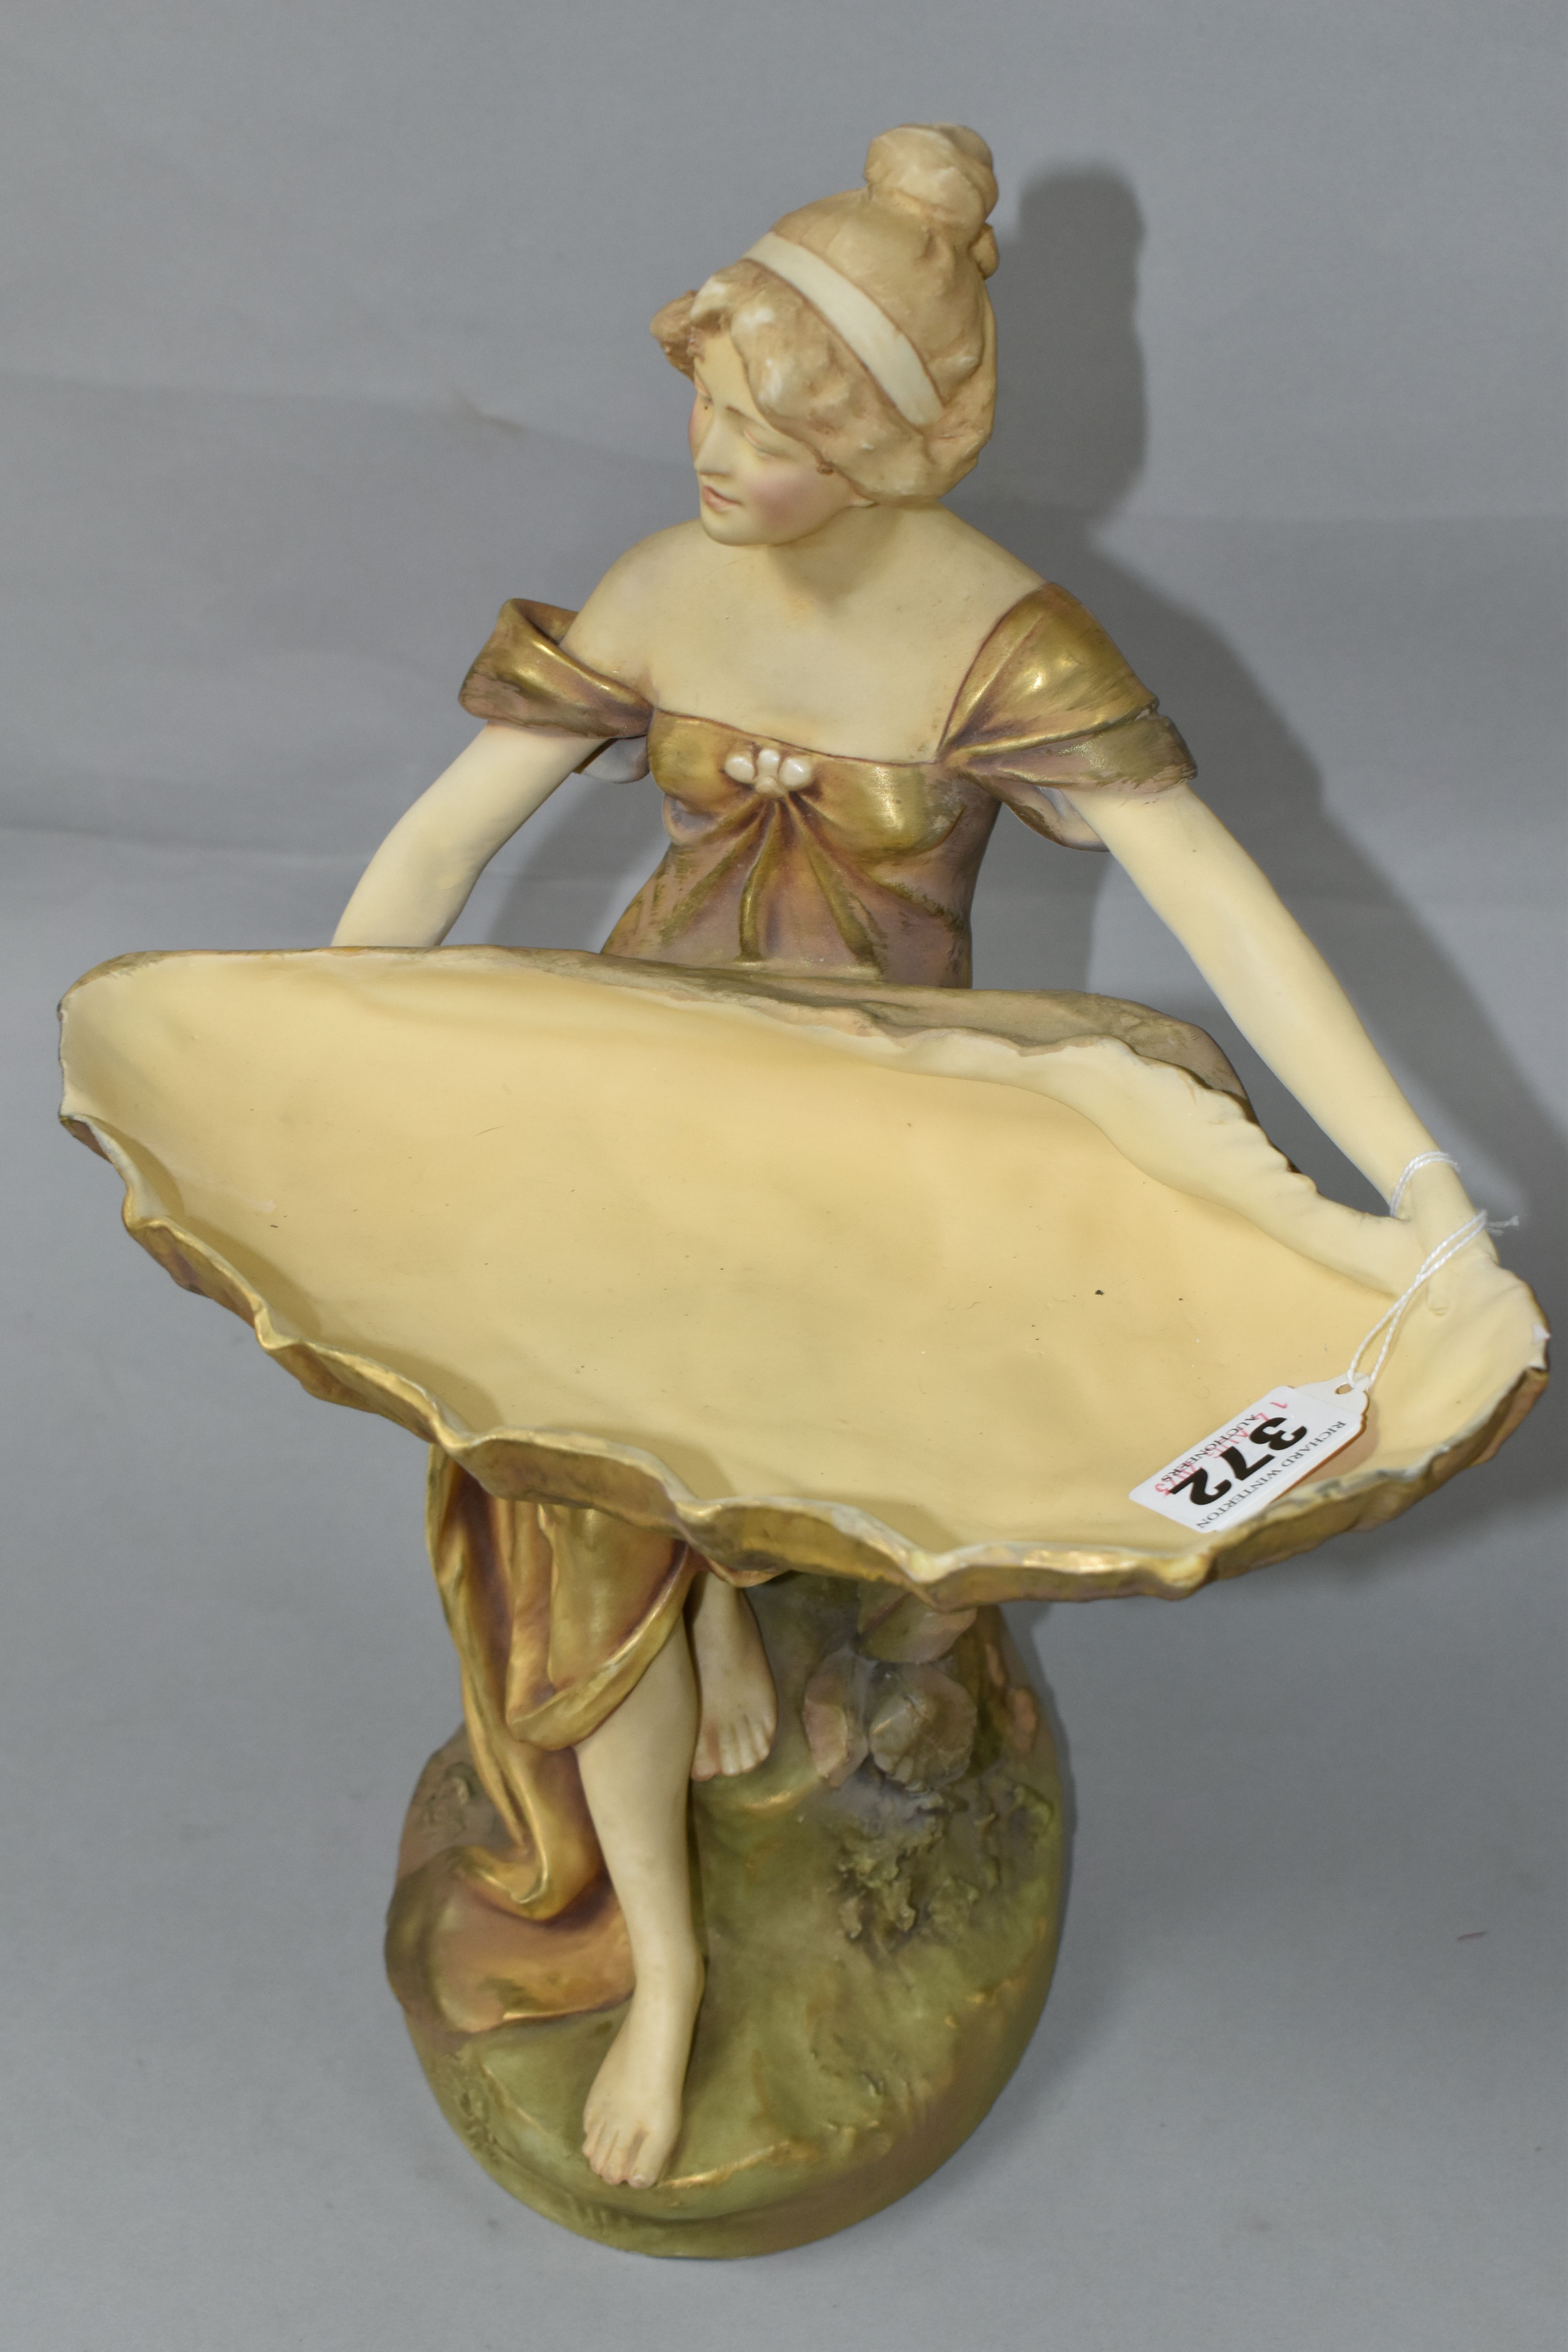 A ROYAL DUX FIGURAL COMPORT, modelled as a female figure holding a large shell, pink triangle mark - Image 6 of 7